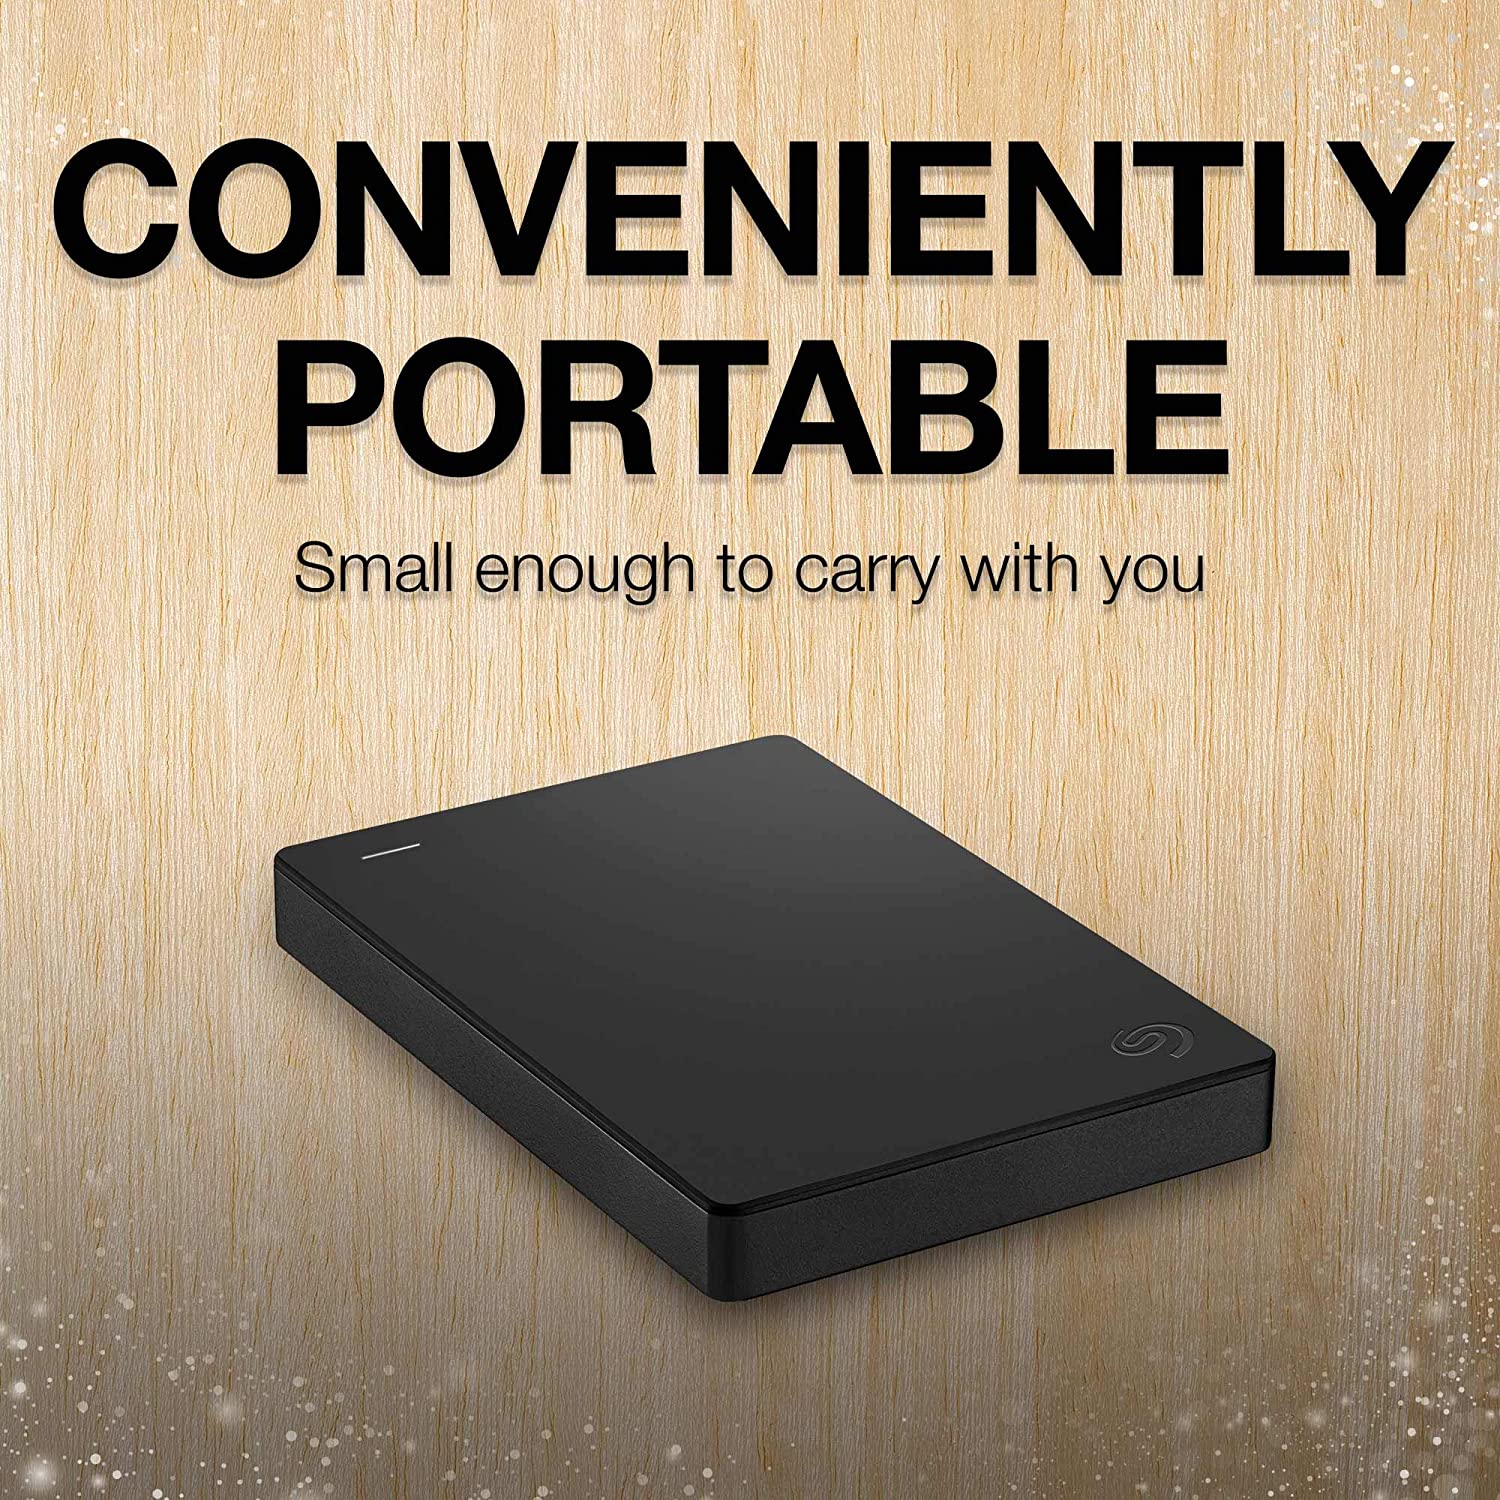 best portable hard drives in 2022